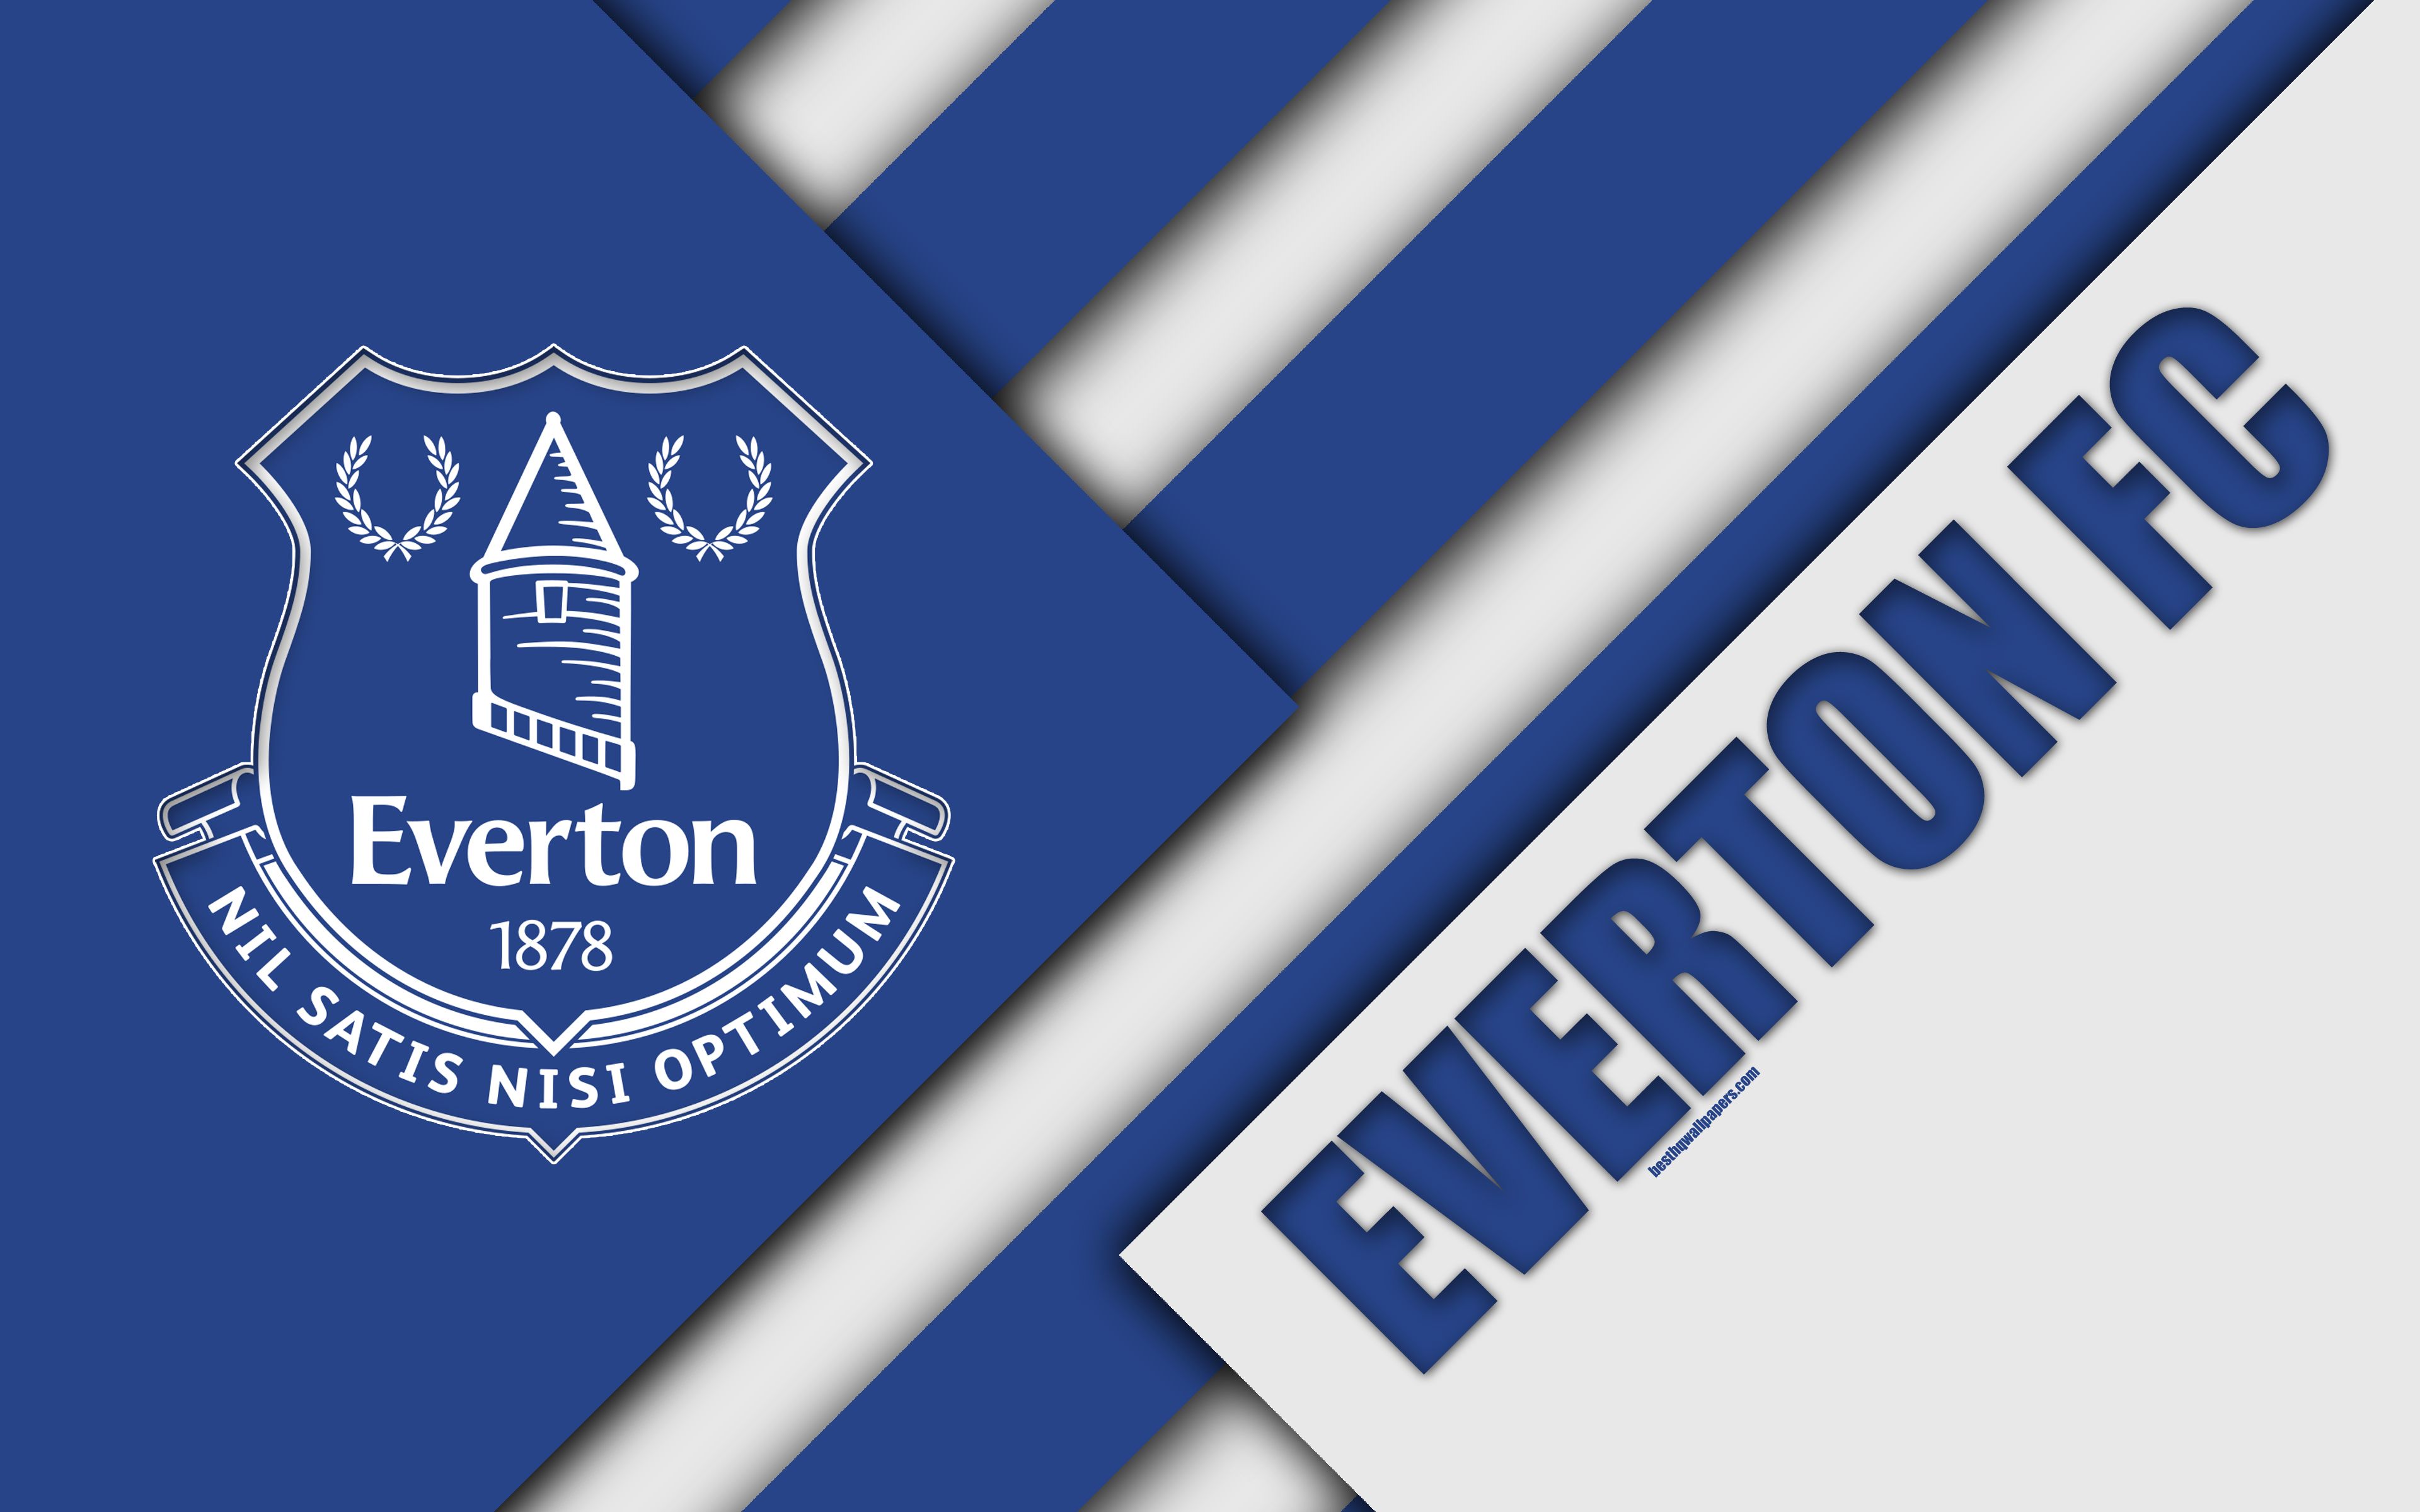 Download wallpaper Everton FC, logo, 4k, material design, blue white abstraction, football, Liverpool, England, UK, Premier League, English football club for desktop with resolution 3840x2400. High Quality HD picture wallpaper